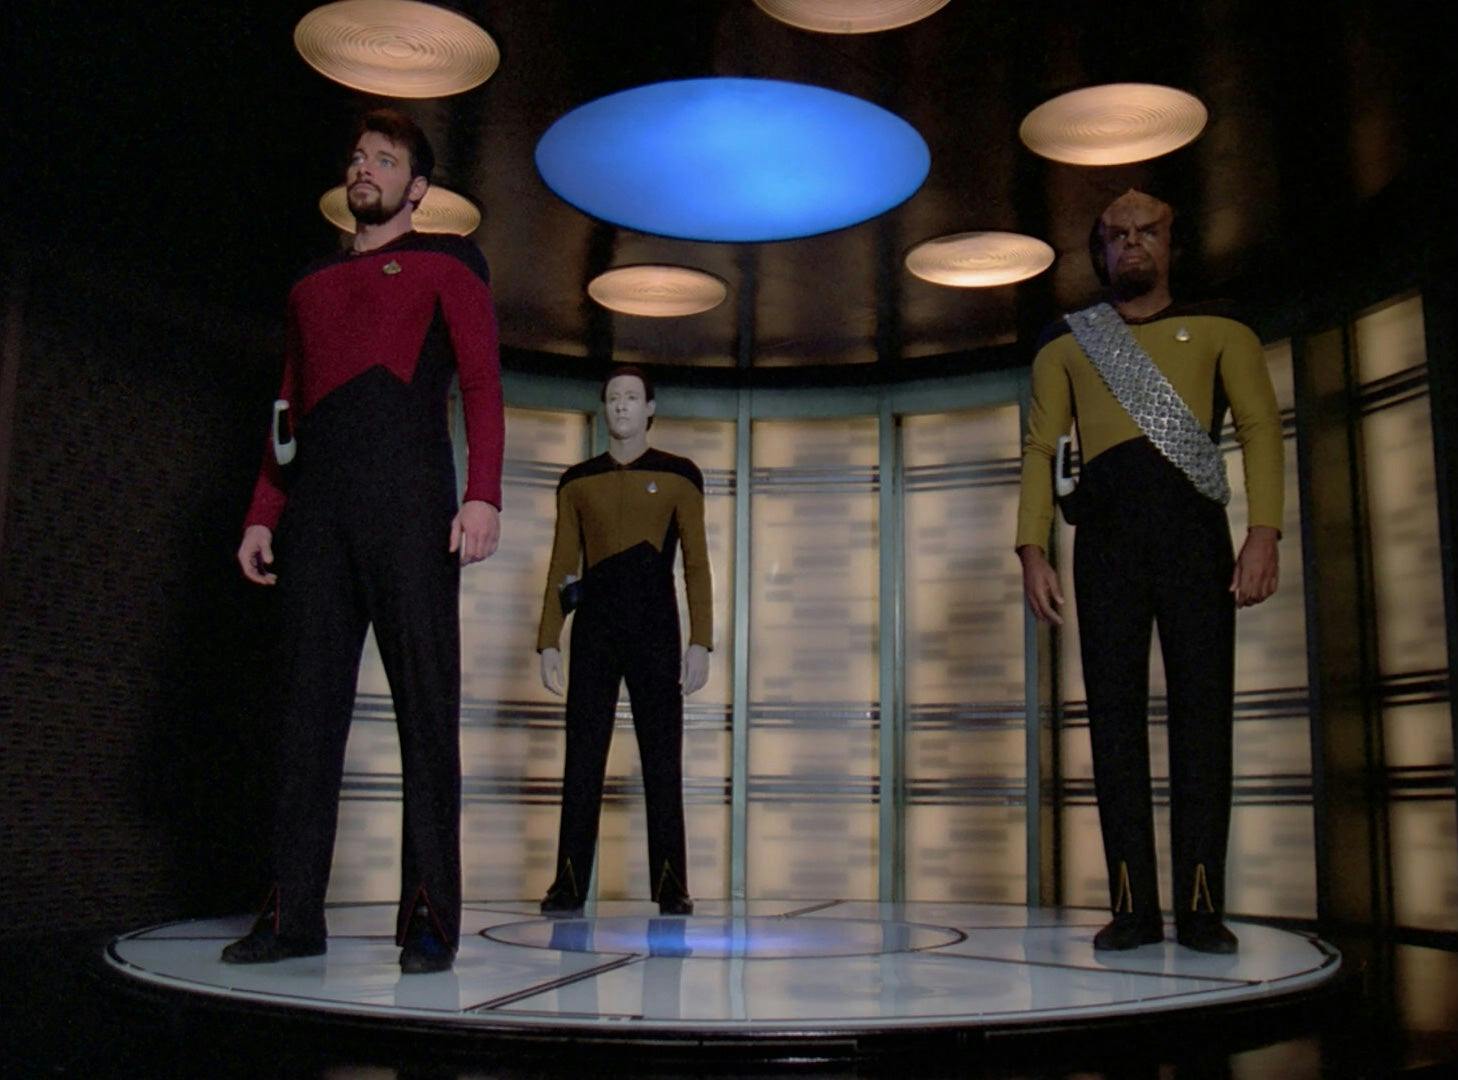 Riker, Data, and Worf get ready to beam down to a new planet.